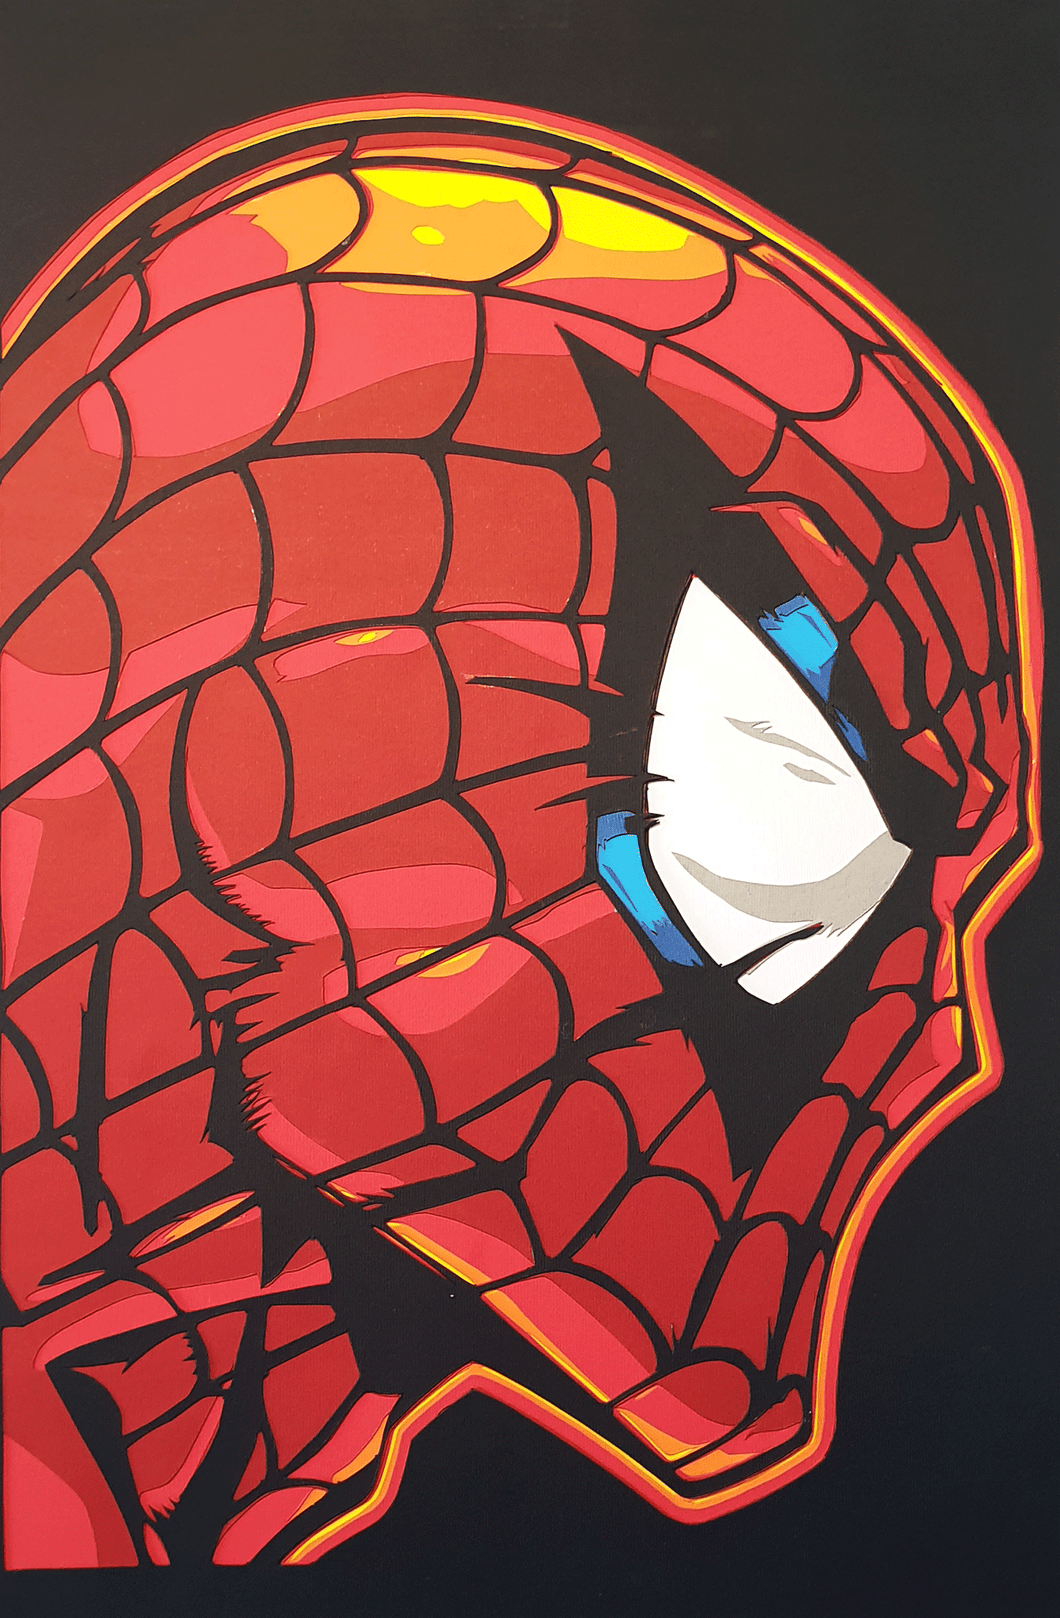 Spiderman Face off by Rick Sharif - FRAMED [A3 Size (297 x 420 mm) (11.7 x 16.5 in) in a FRAME]